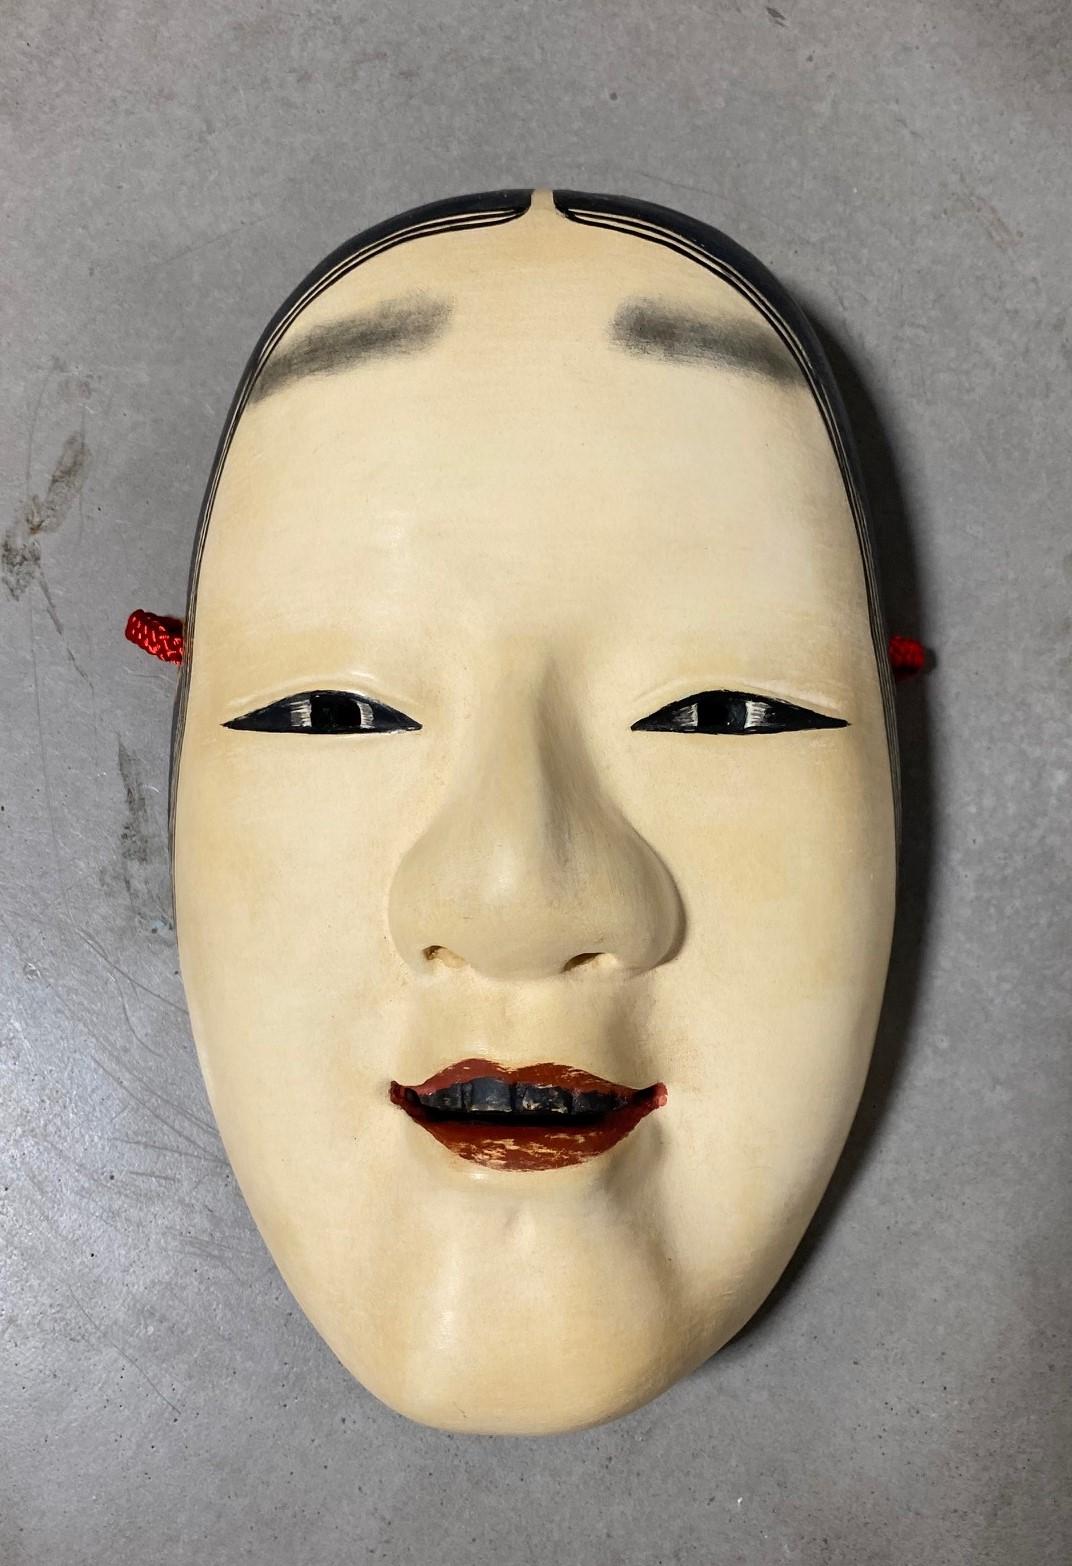 A beautiful, wonderfully crafted, alluring mask made for Japanese Noh theater.

This mask is handcrafted and hand-carved from natural wood and signed/sealed by the maker on the underside. 

This mask is the mask of Waka-Onna - or young beautiful